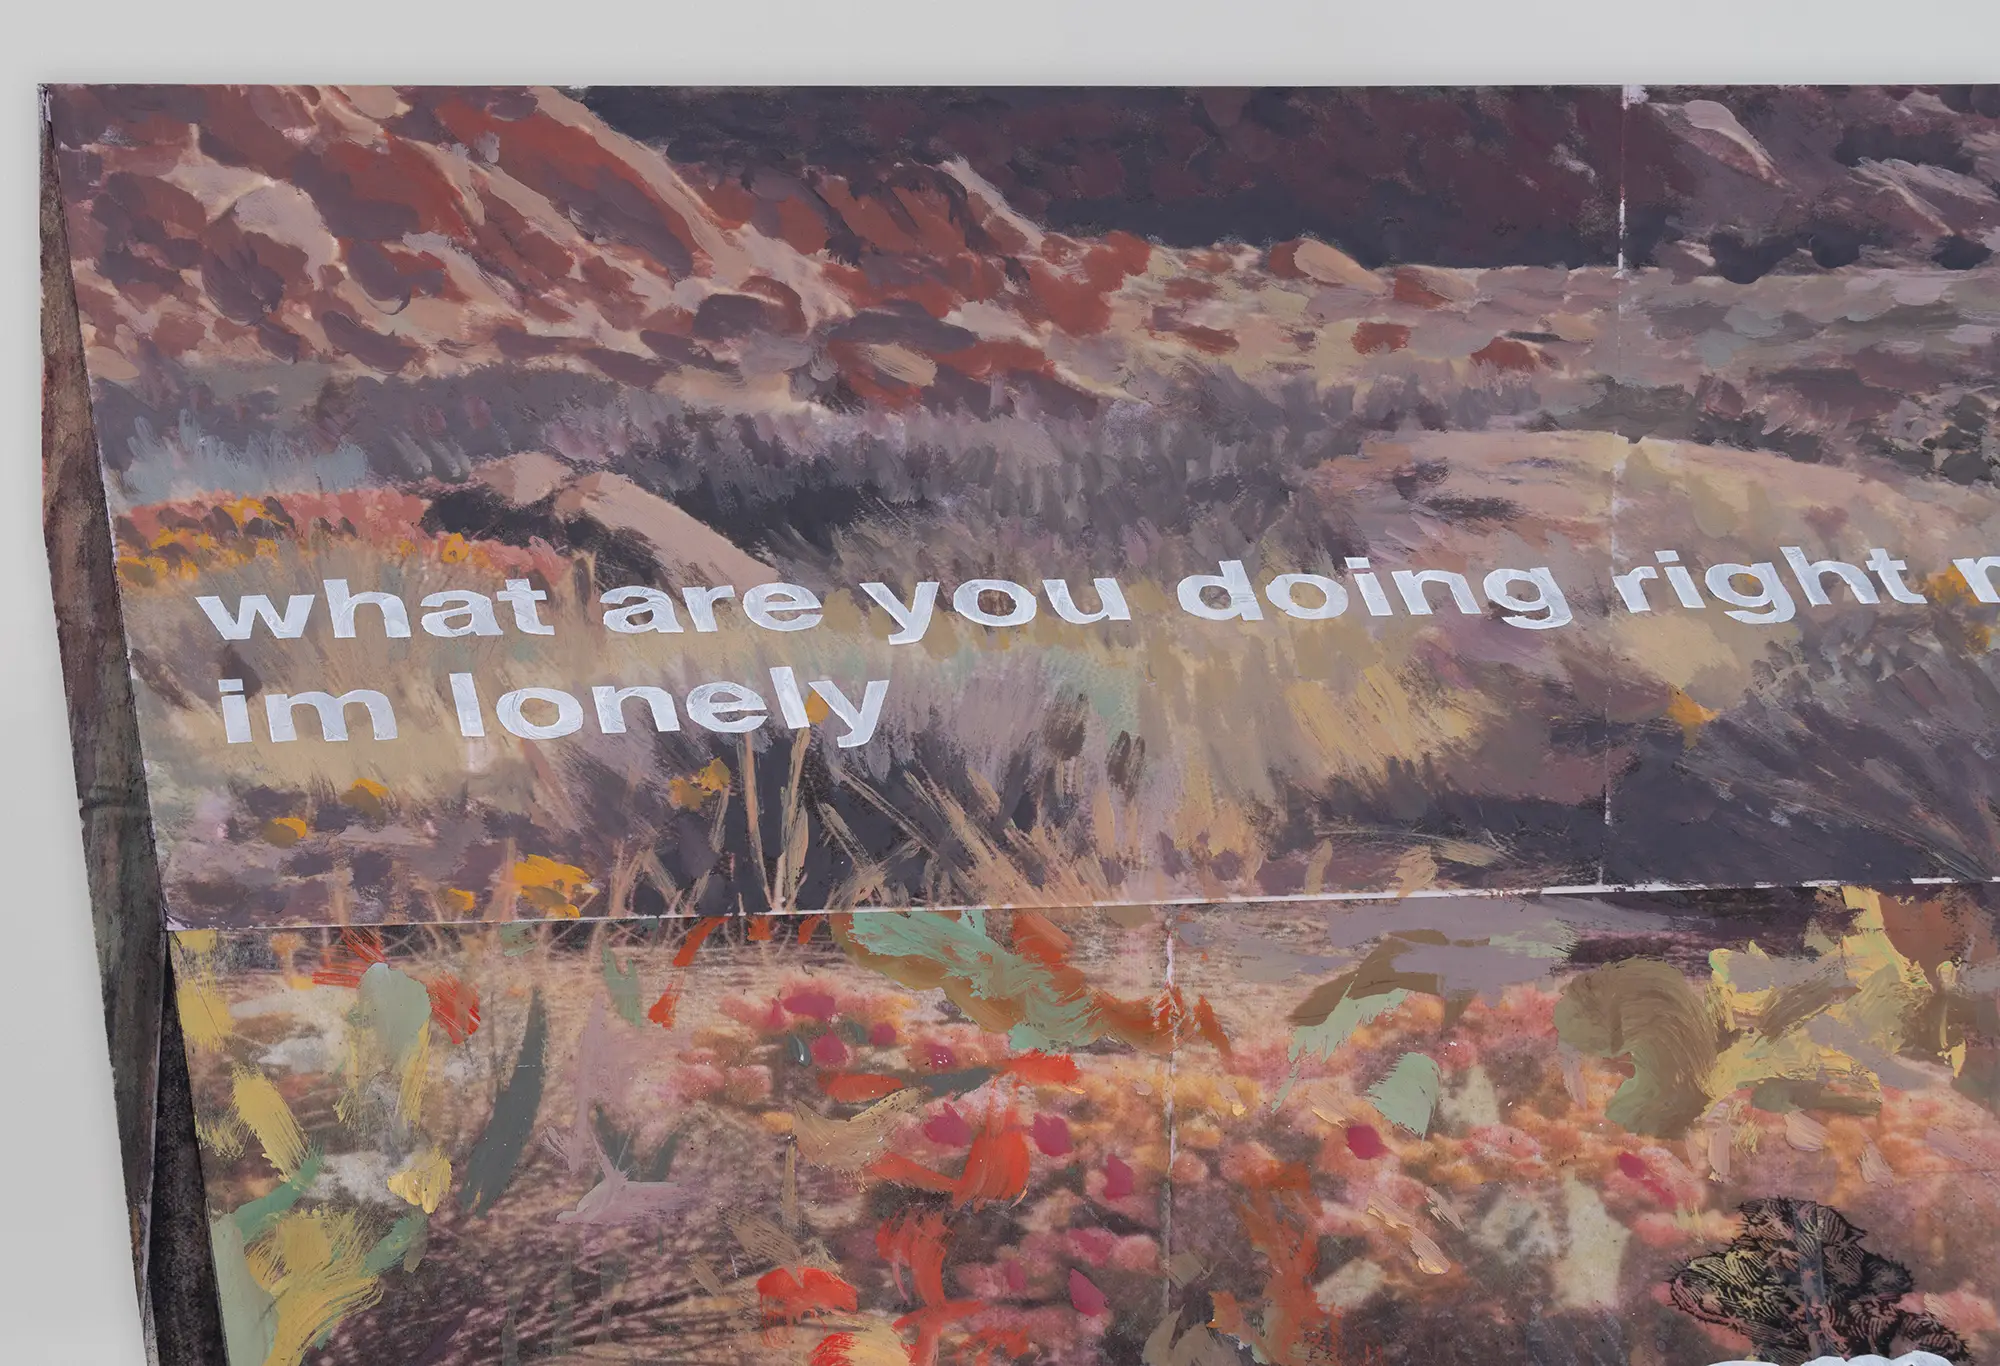 michael rikio ming hee ho detail of wall installation depicting a serene landscape with rugged hills and a meadow of wildflowers, overlaid with bold white text 'what are you doing right now, im lonely' contrasting against the natural background